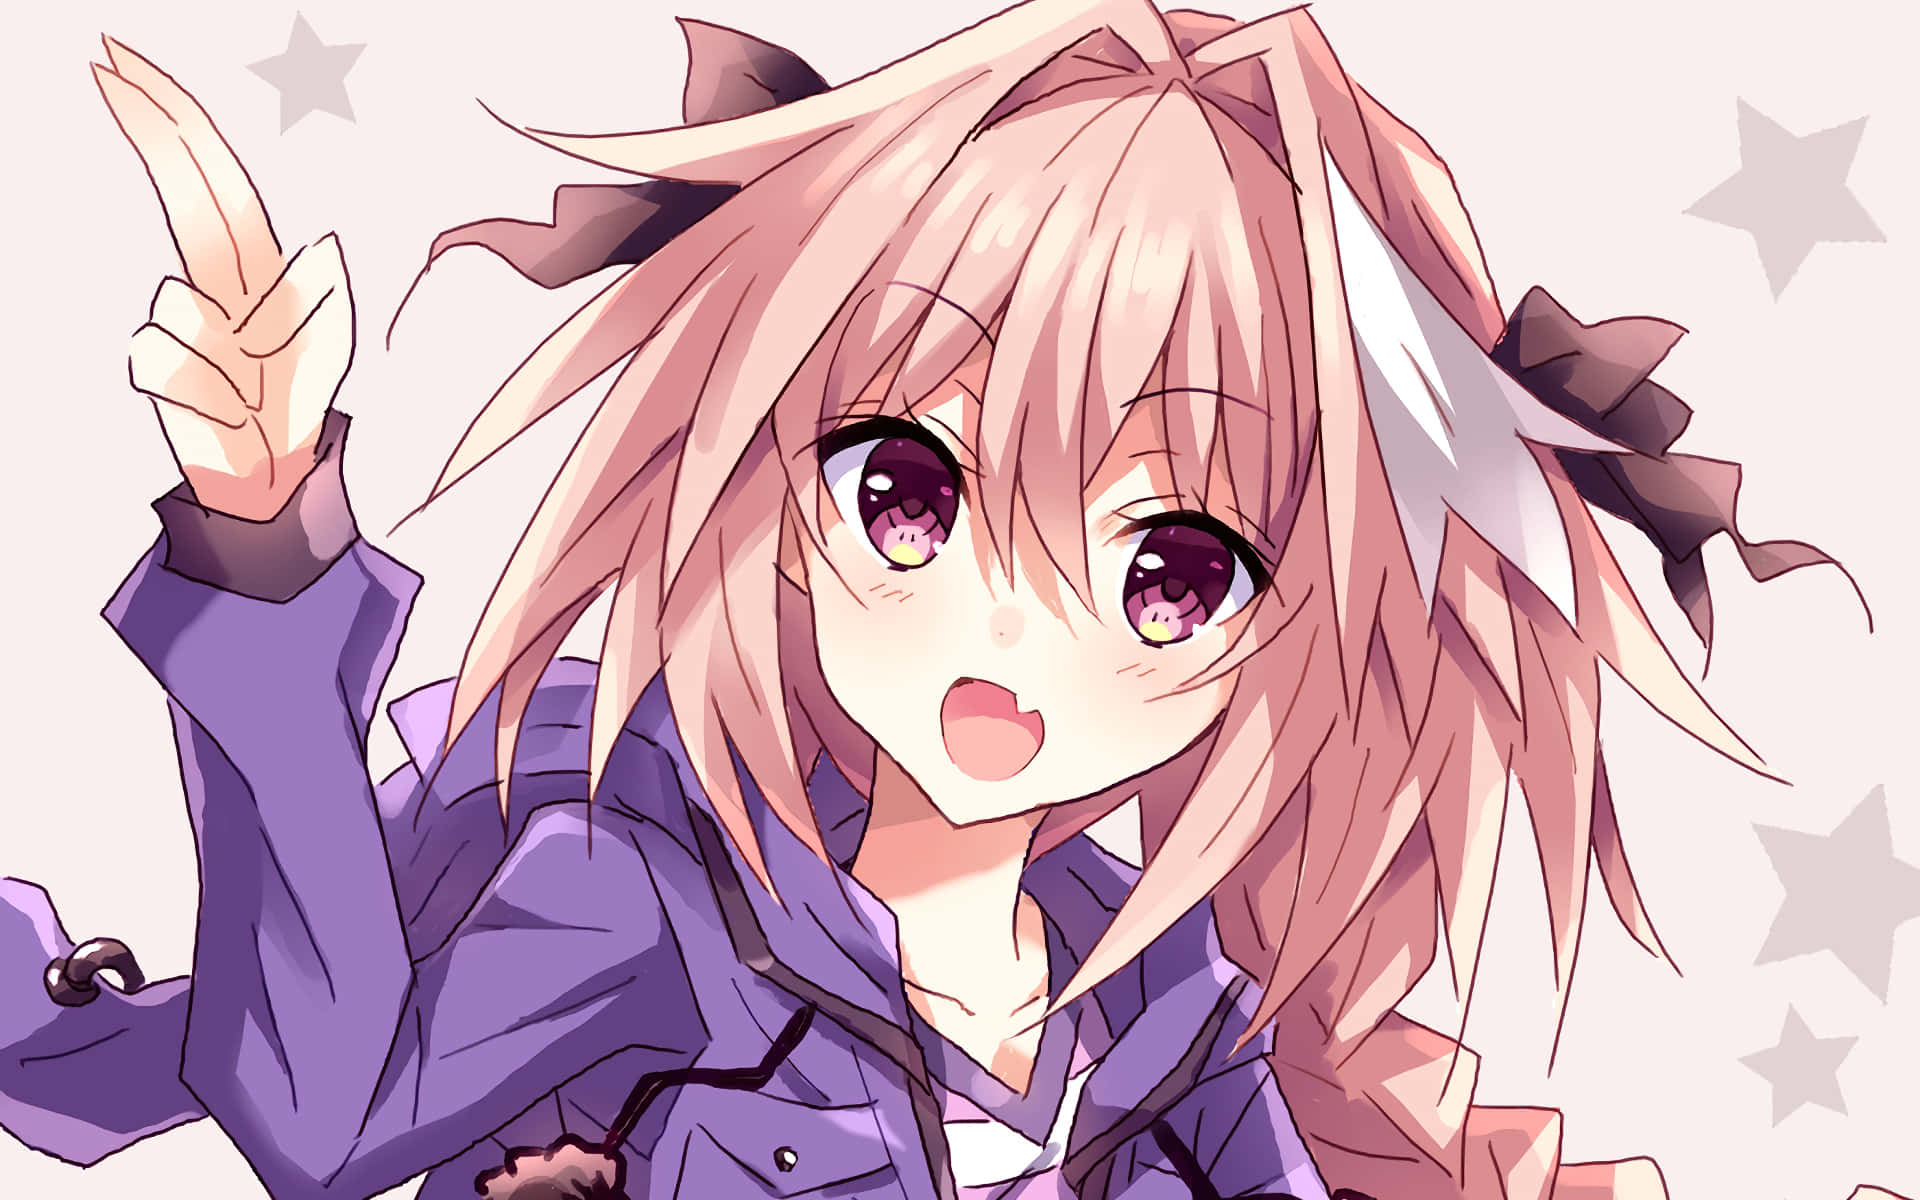 Update 54+ astolfo wallpapers latest - in.cdgdbentre